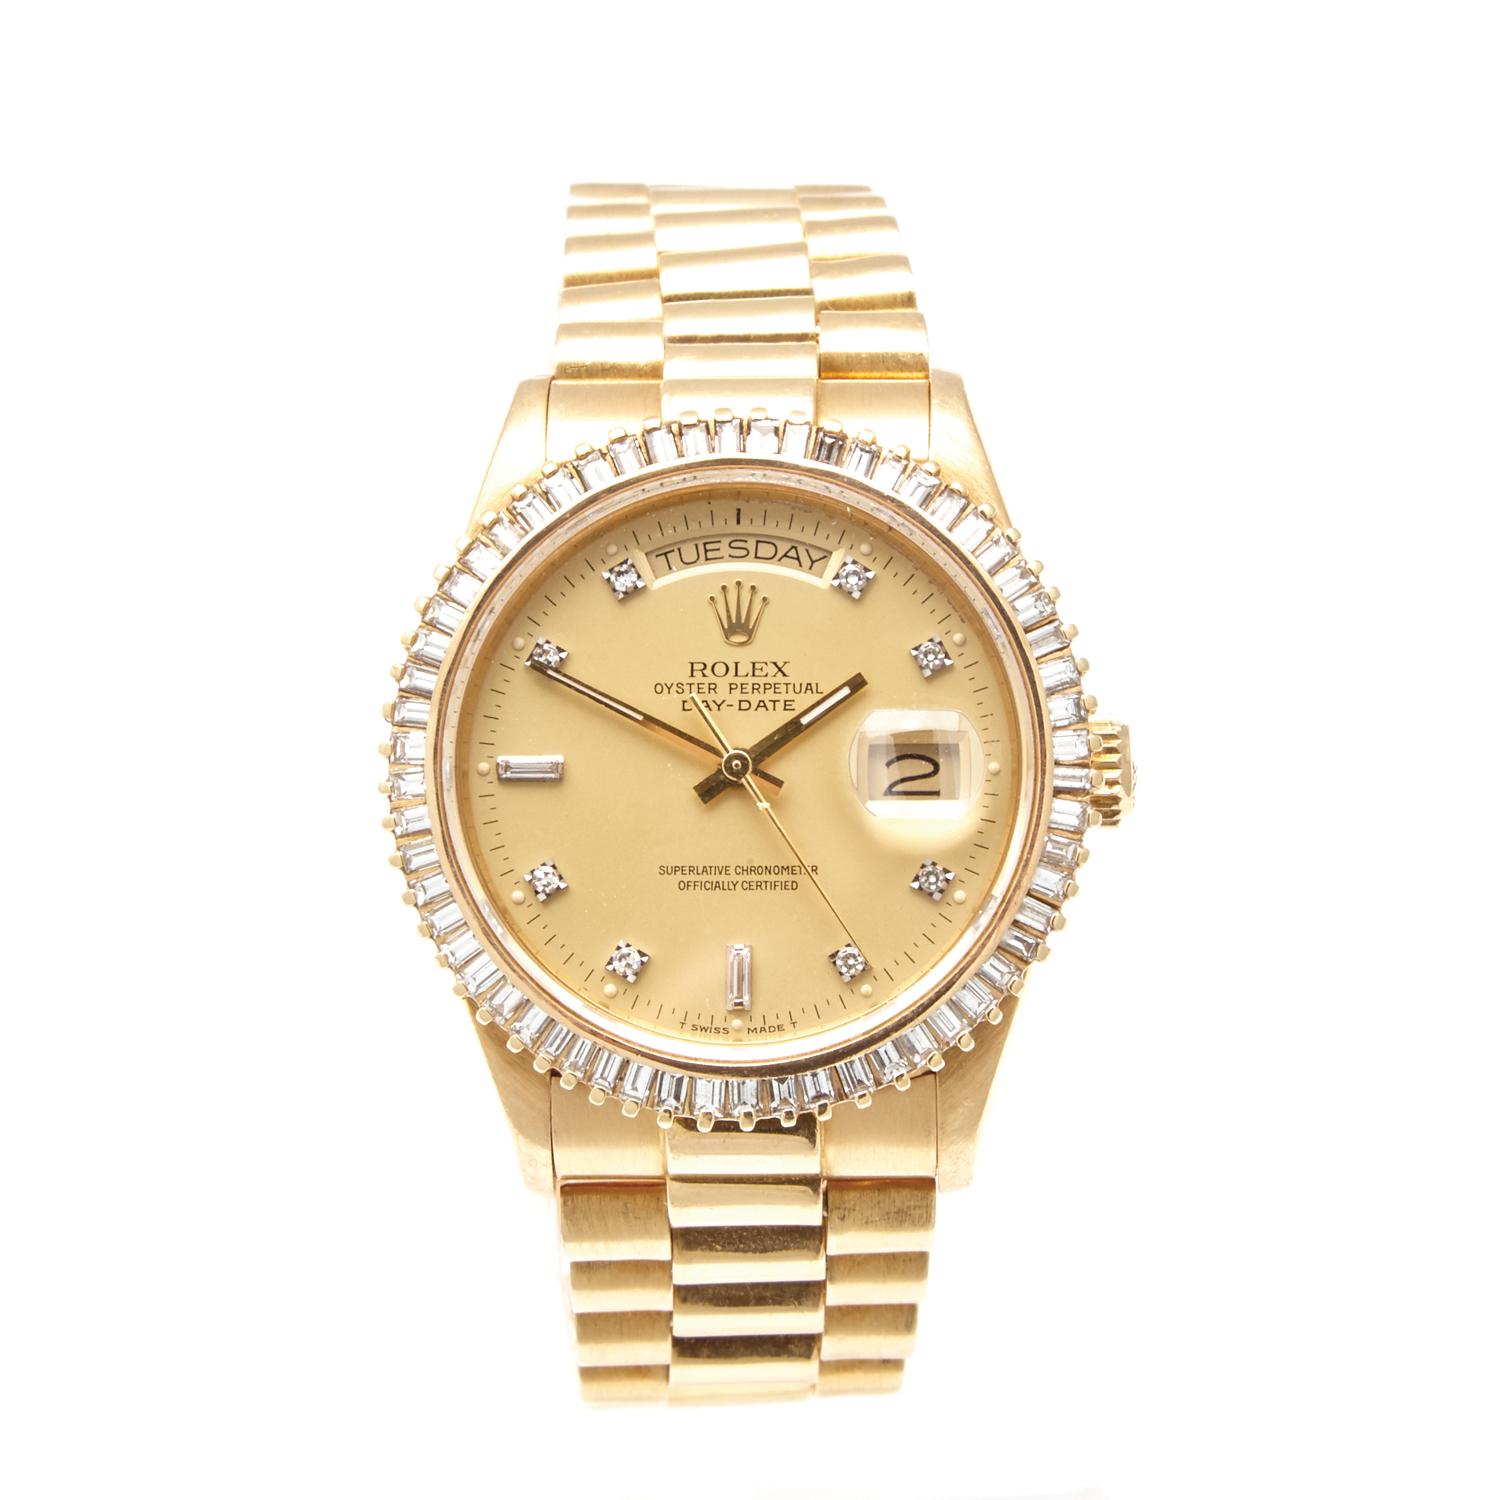 rolex oyster perpetual day date diamond price